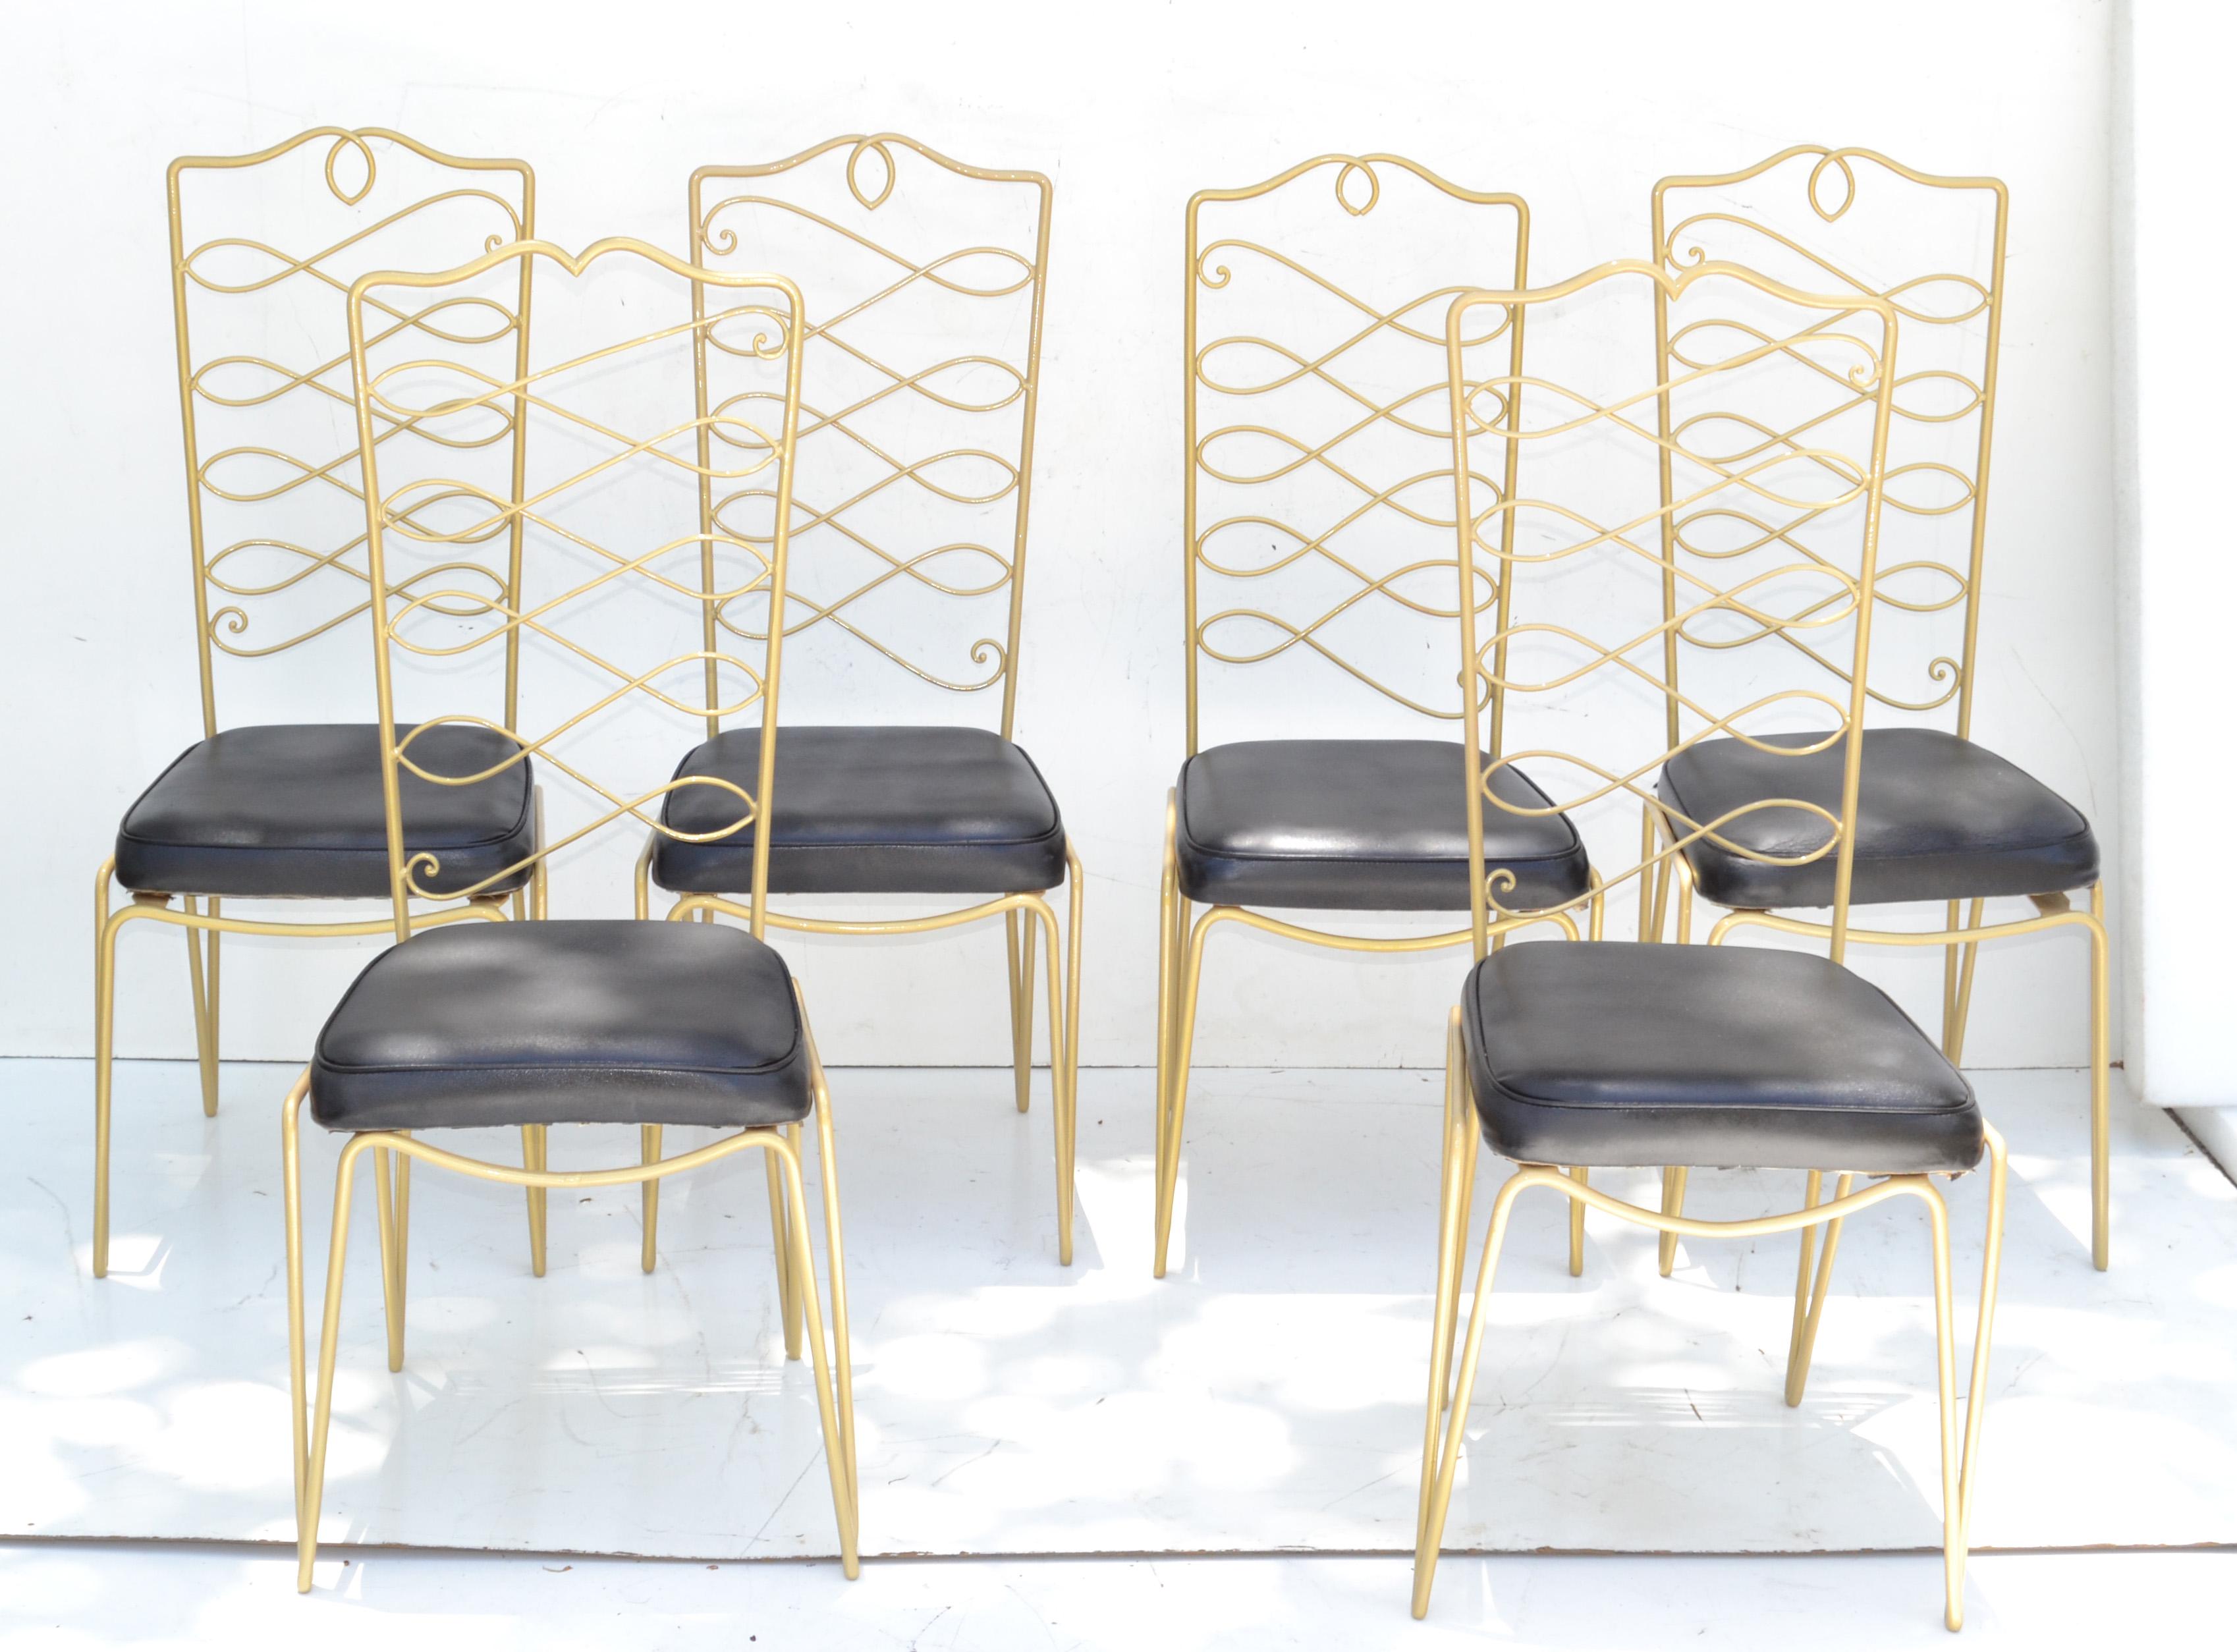 Rene Prou Art Deco Golden Wrought Iron Dining Room Chairs Black Vinyl Seats, 6 For Sale 8